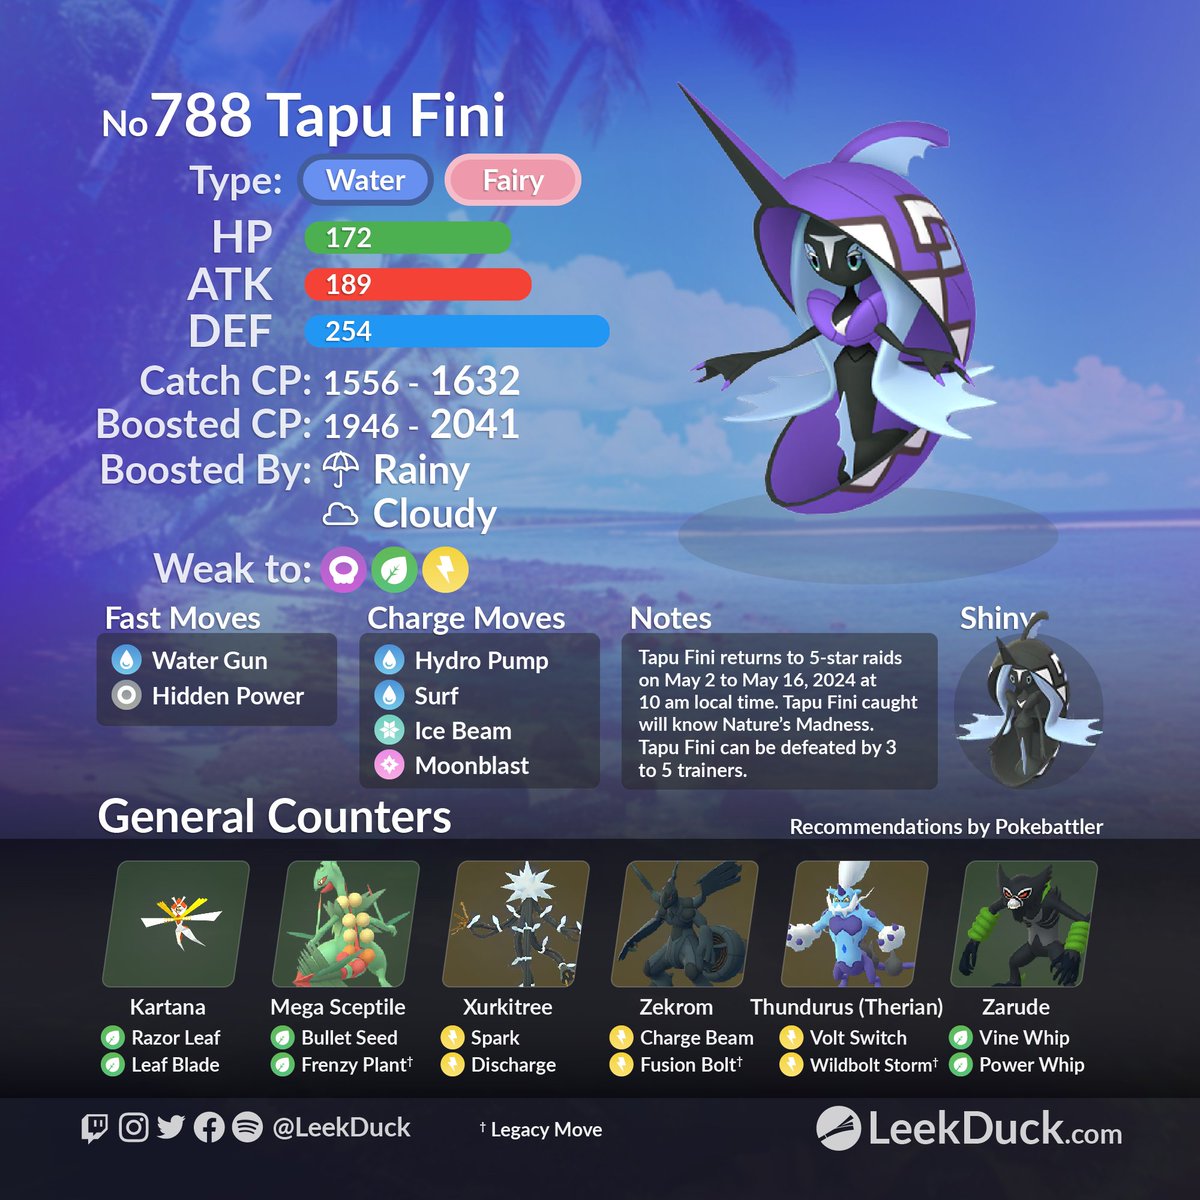 Tapu Fini returns to 5-star raid battles from Thursday, May 2, at 10 am to Thursday, May 16, 2024, at 10 am local time. • Tapu Fini caught will know the featured attack Nature’s Madness. Join and host global raids with Raid NOW: 🥊leekduck.com/raidnow/